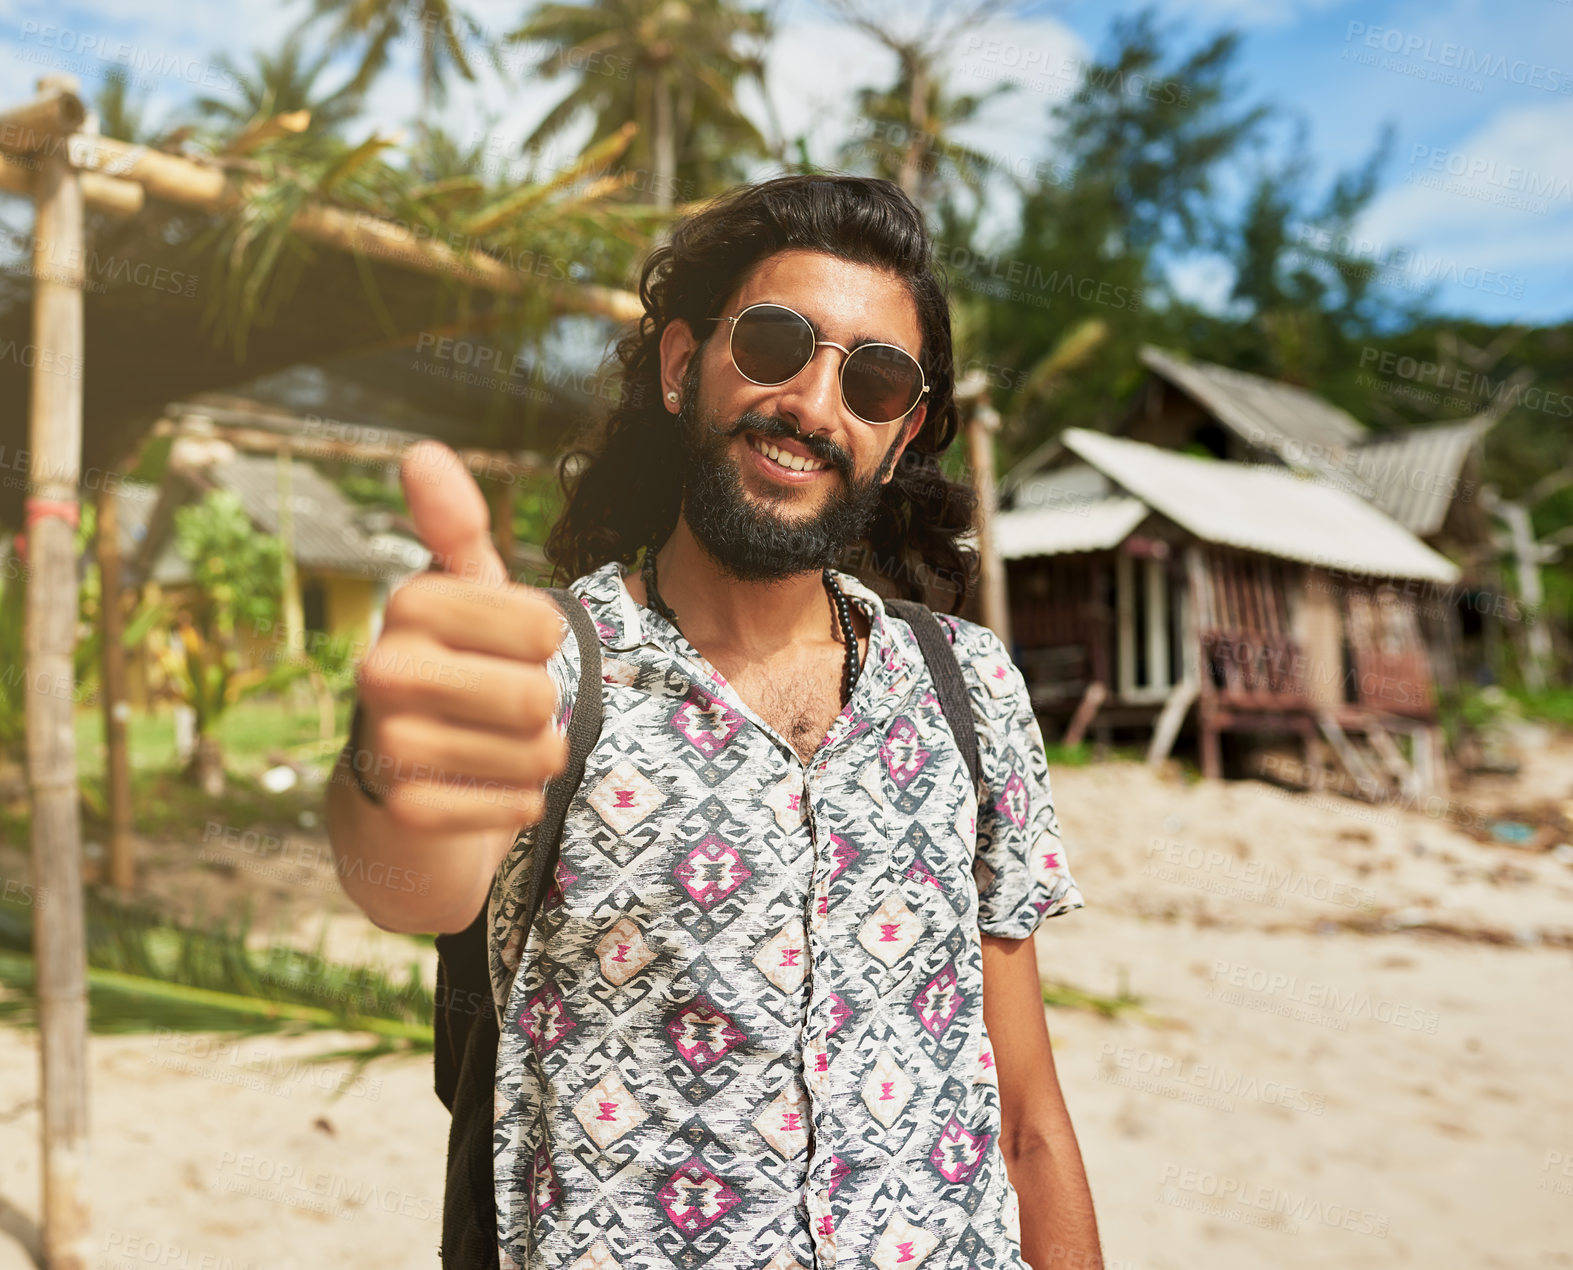 Buy stock photo Happy man, portrait and tourist with thumbs up on island for holiday or summer vacation in hawaii. Male person with smile, sunglasses and like emoji or sign for good adventure, travel or getaway